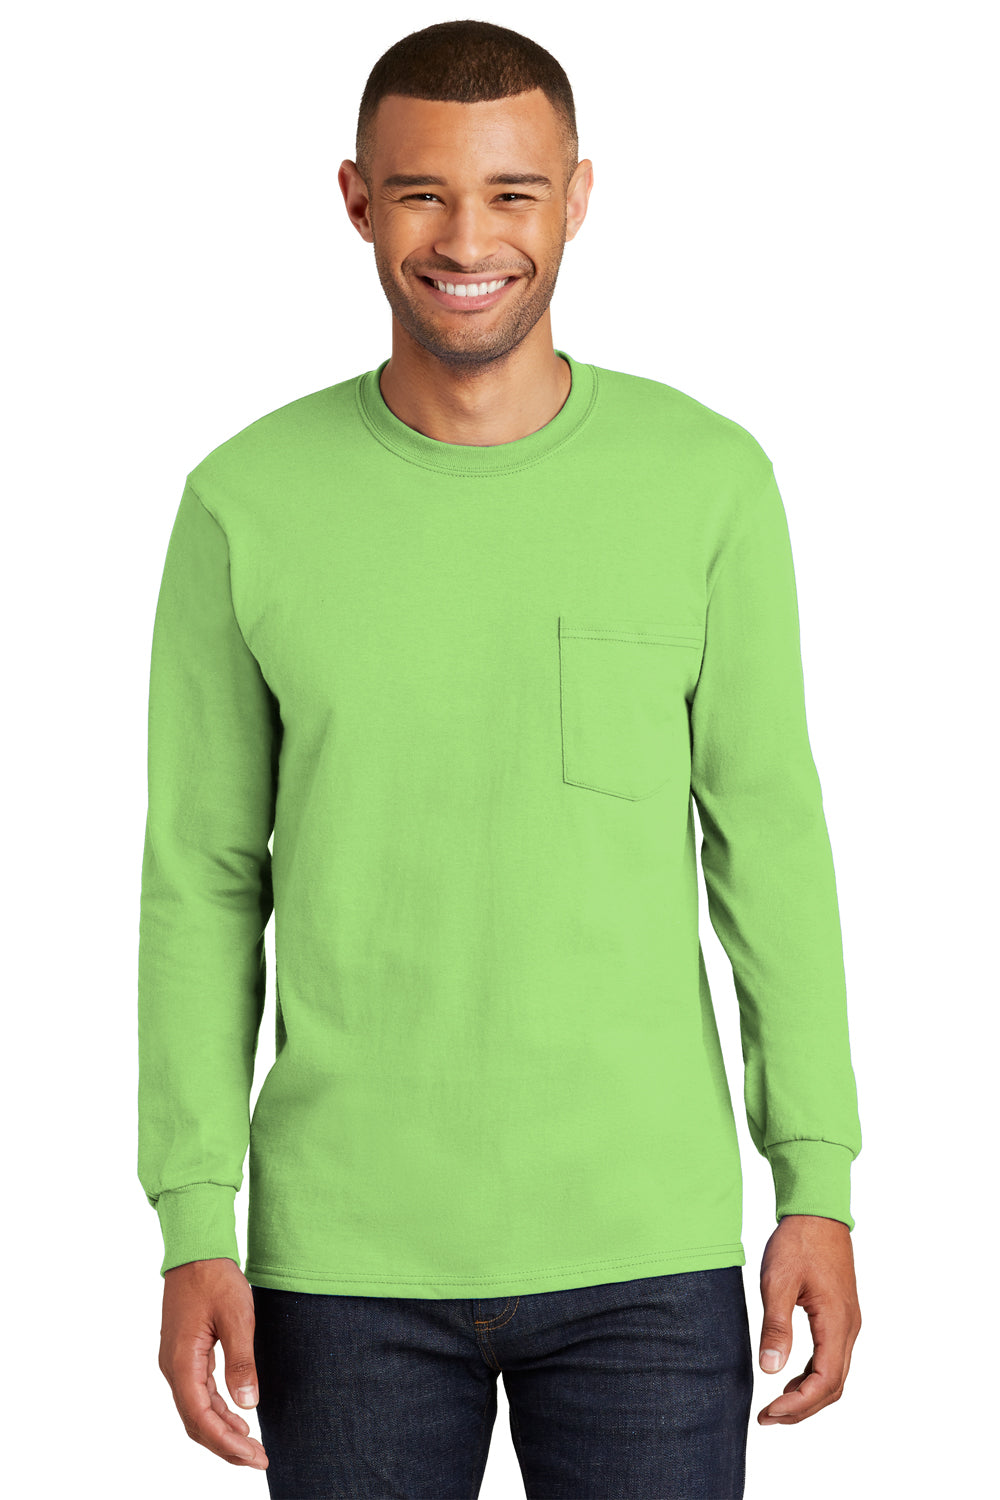 Port & Company PC61LSP Mens Essential Long Sleeve Crewneck T-Shirt w/ Pocket Lime Green Front